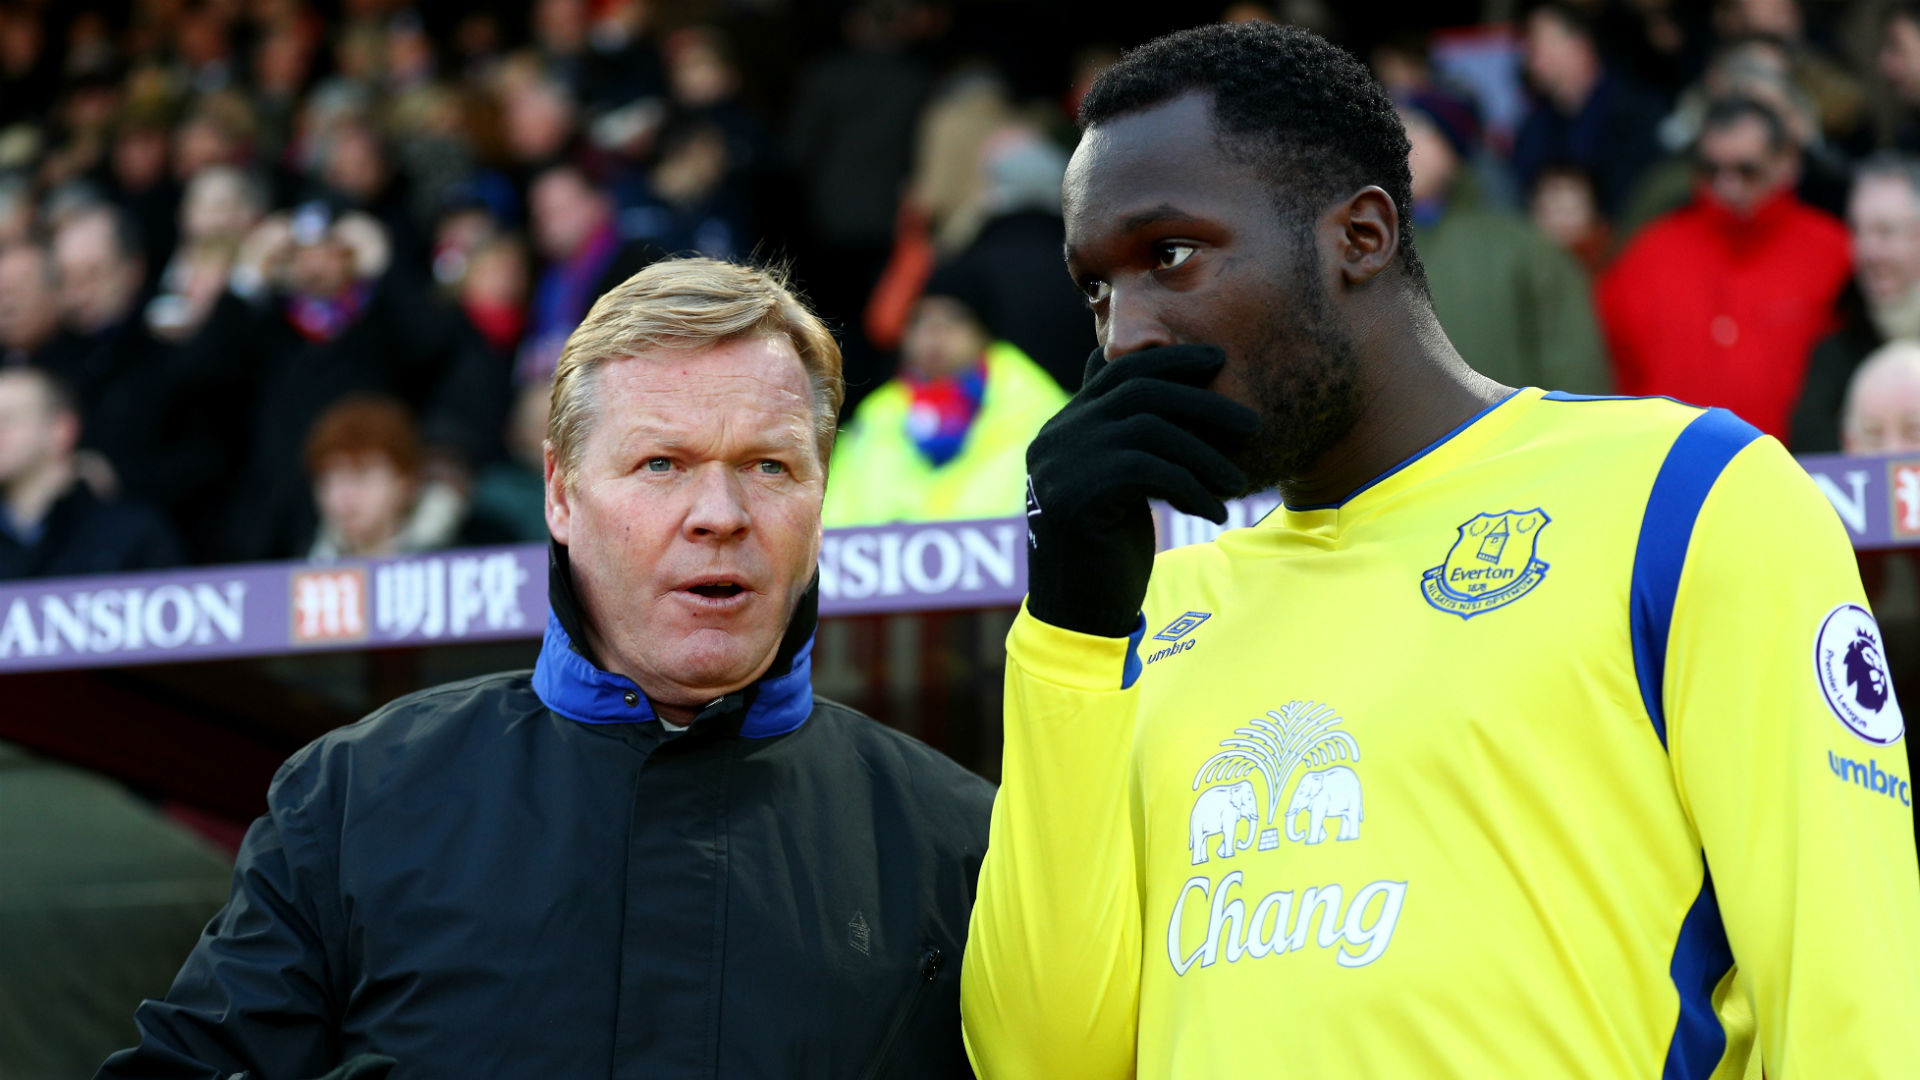 He was strict: Lukaku reveals his first interaction with Ronald Koeman at Everton - THE SPORTS ROOM